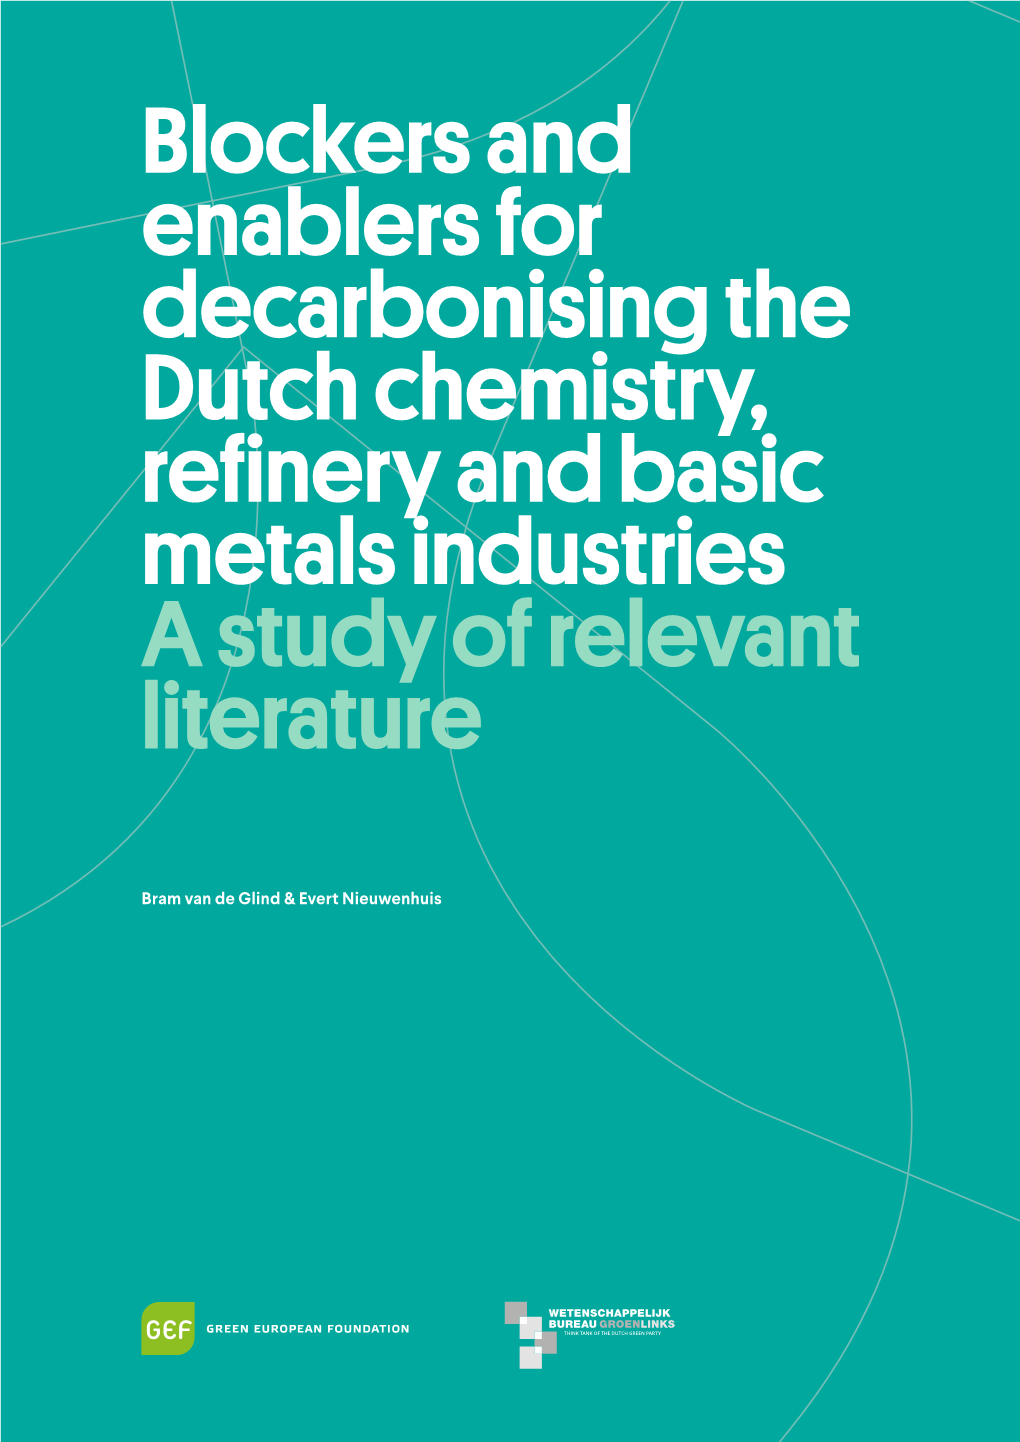 Blockers and Enablers for Decarbonising the Dutch Chemistry, Refinery and Basic Metals Industries a Study of Relevant Literature